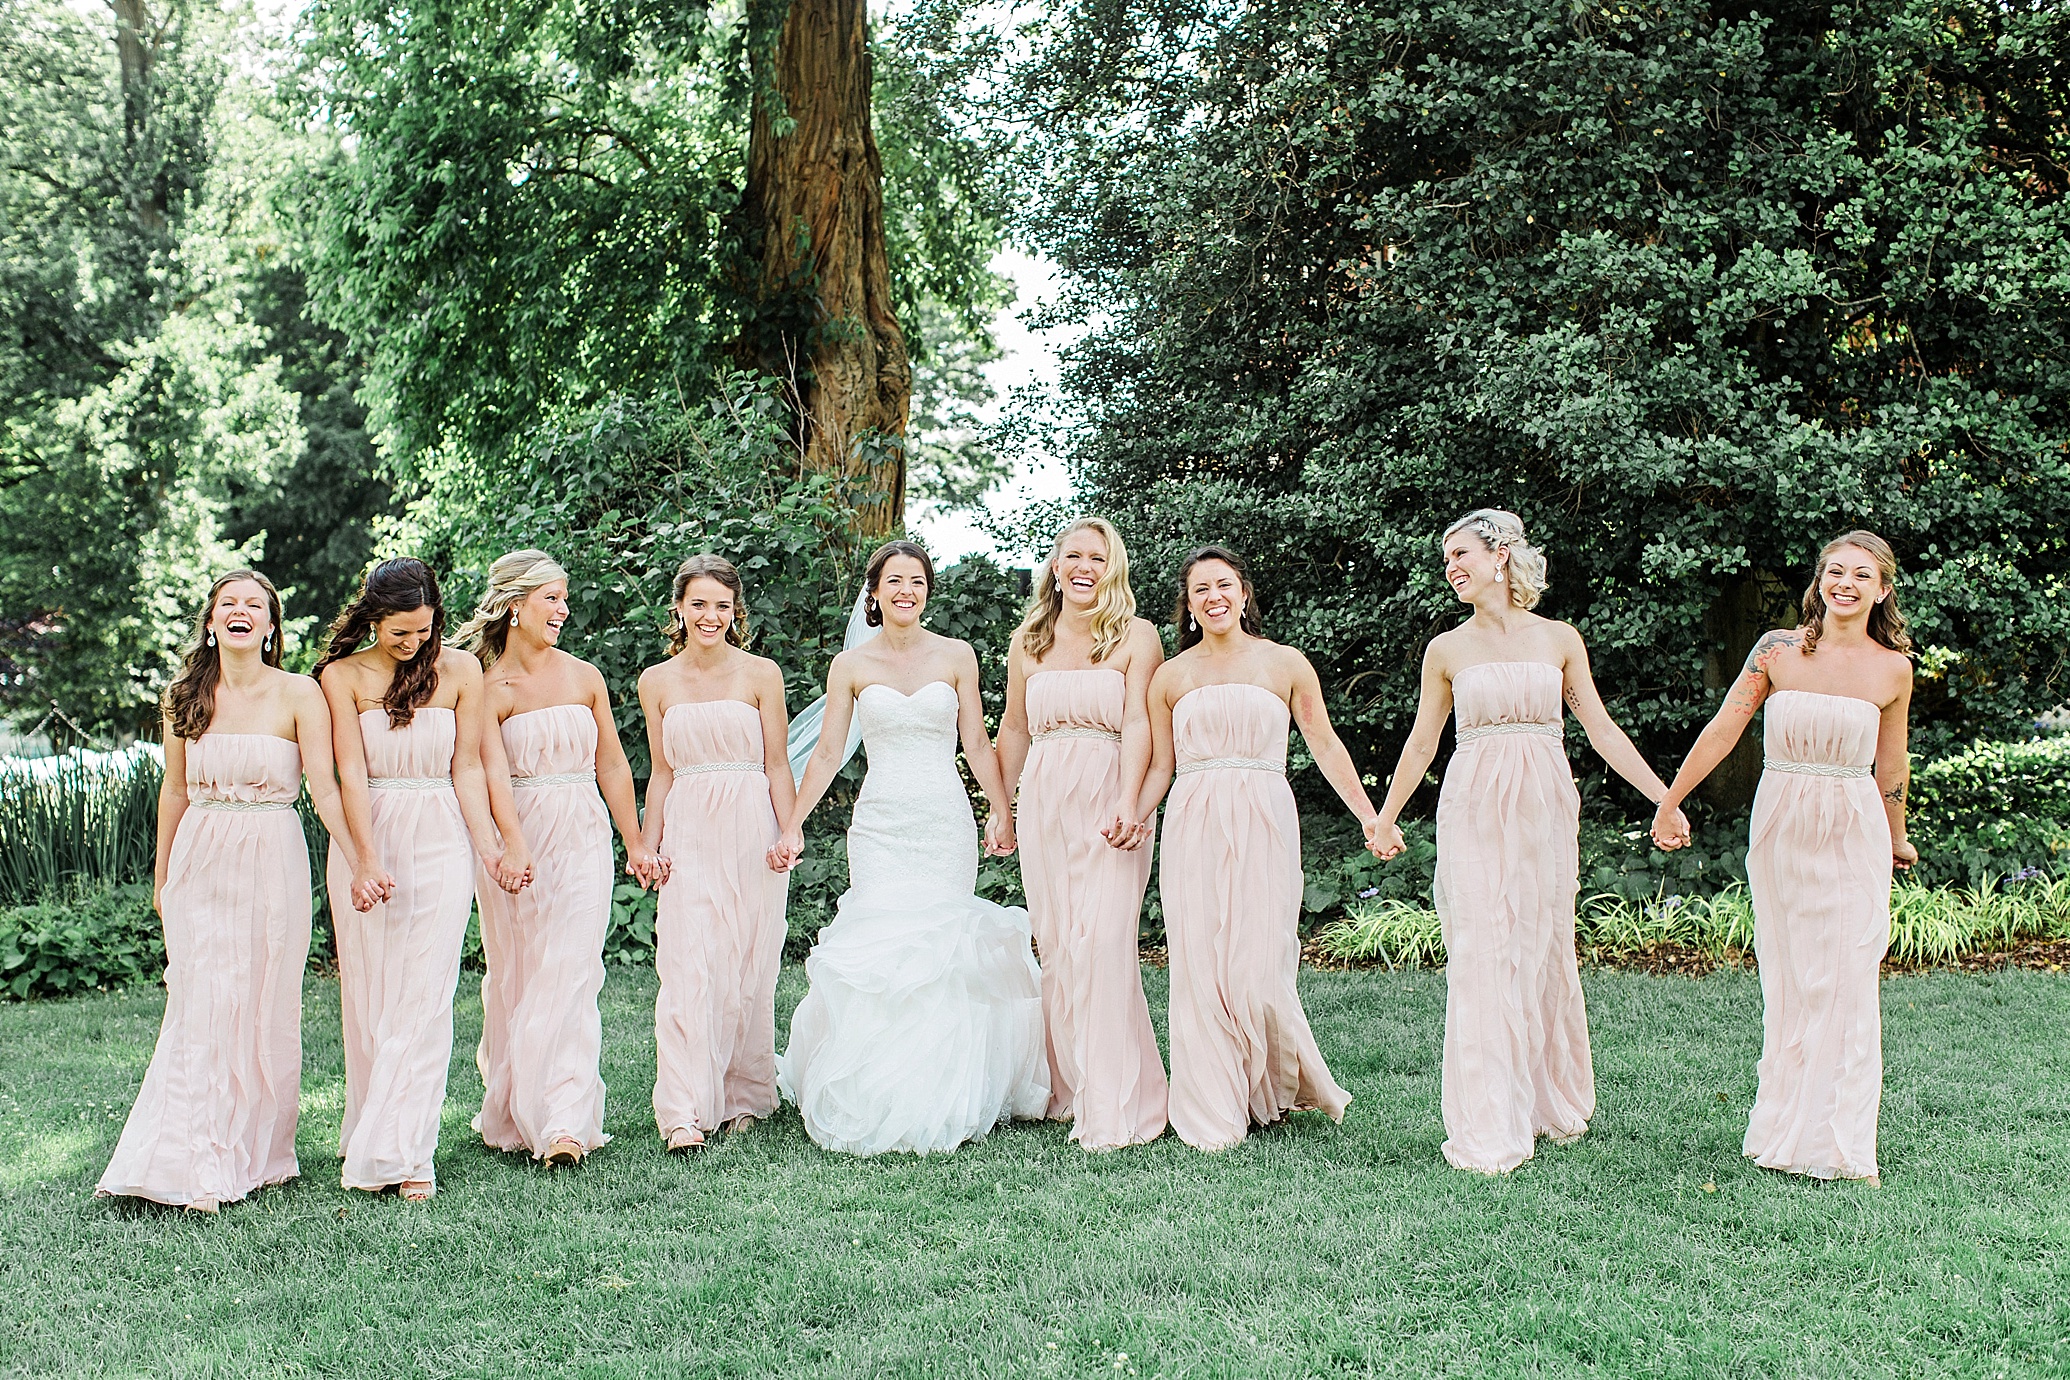 View More: http://dyannajoyphotography.pass.us/francesca-and-jared-wedding